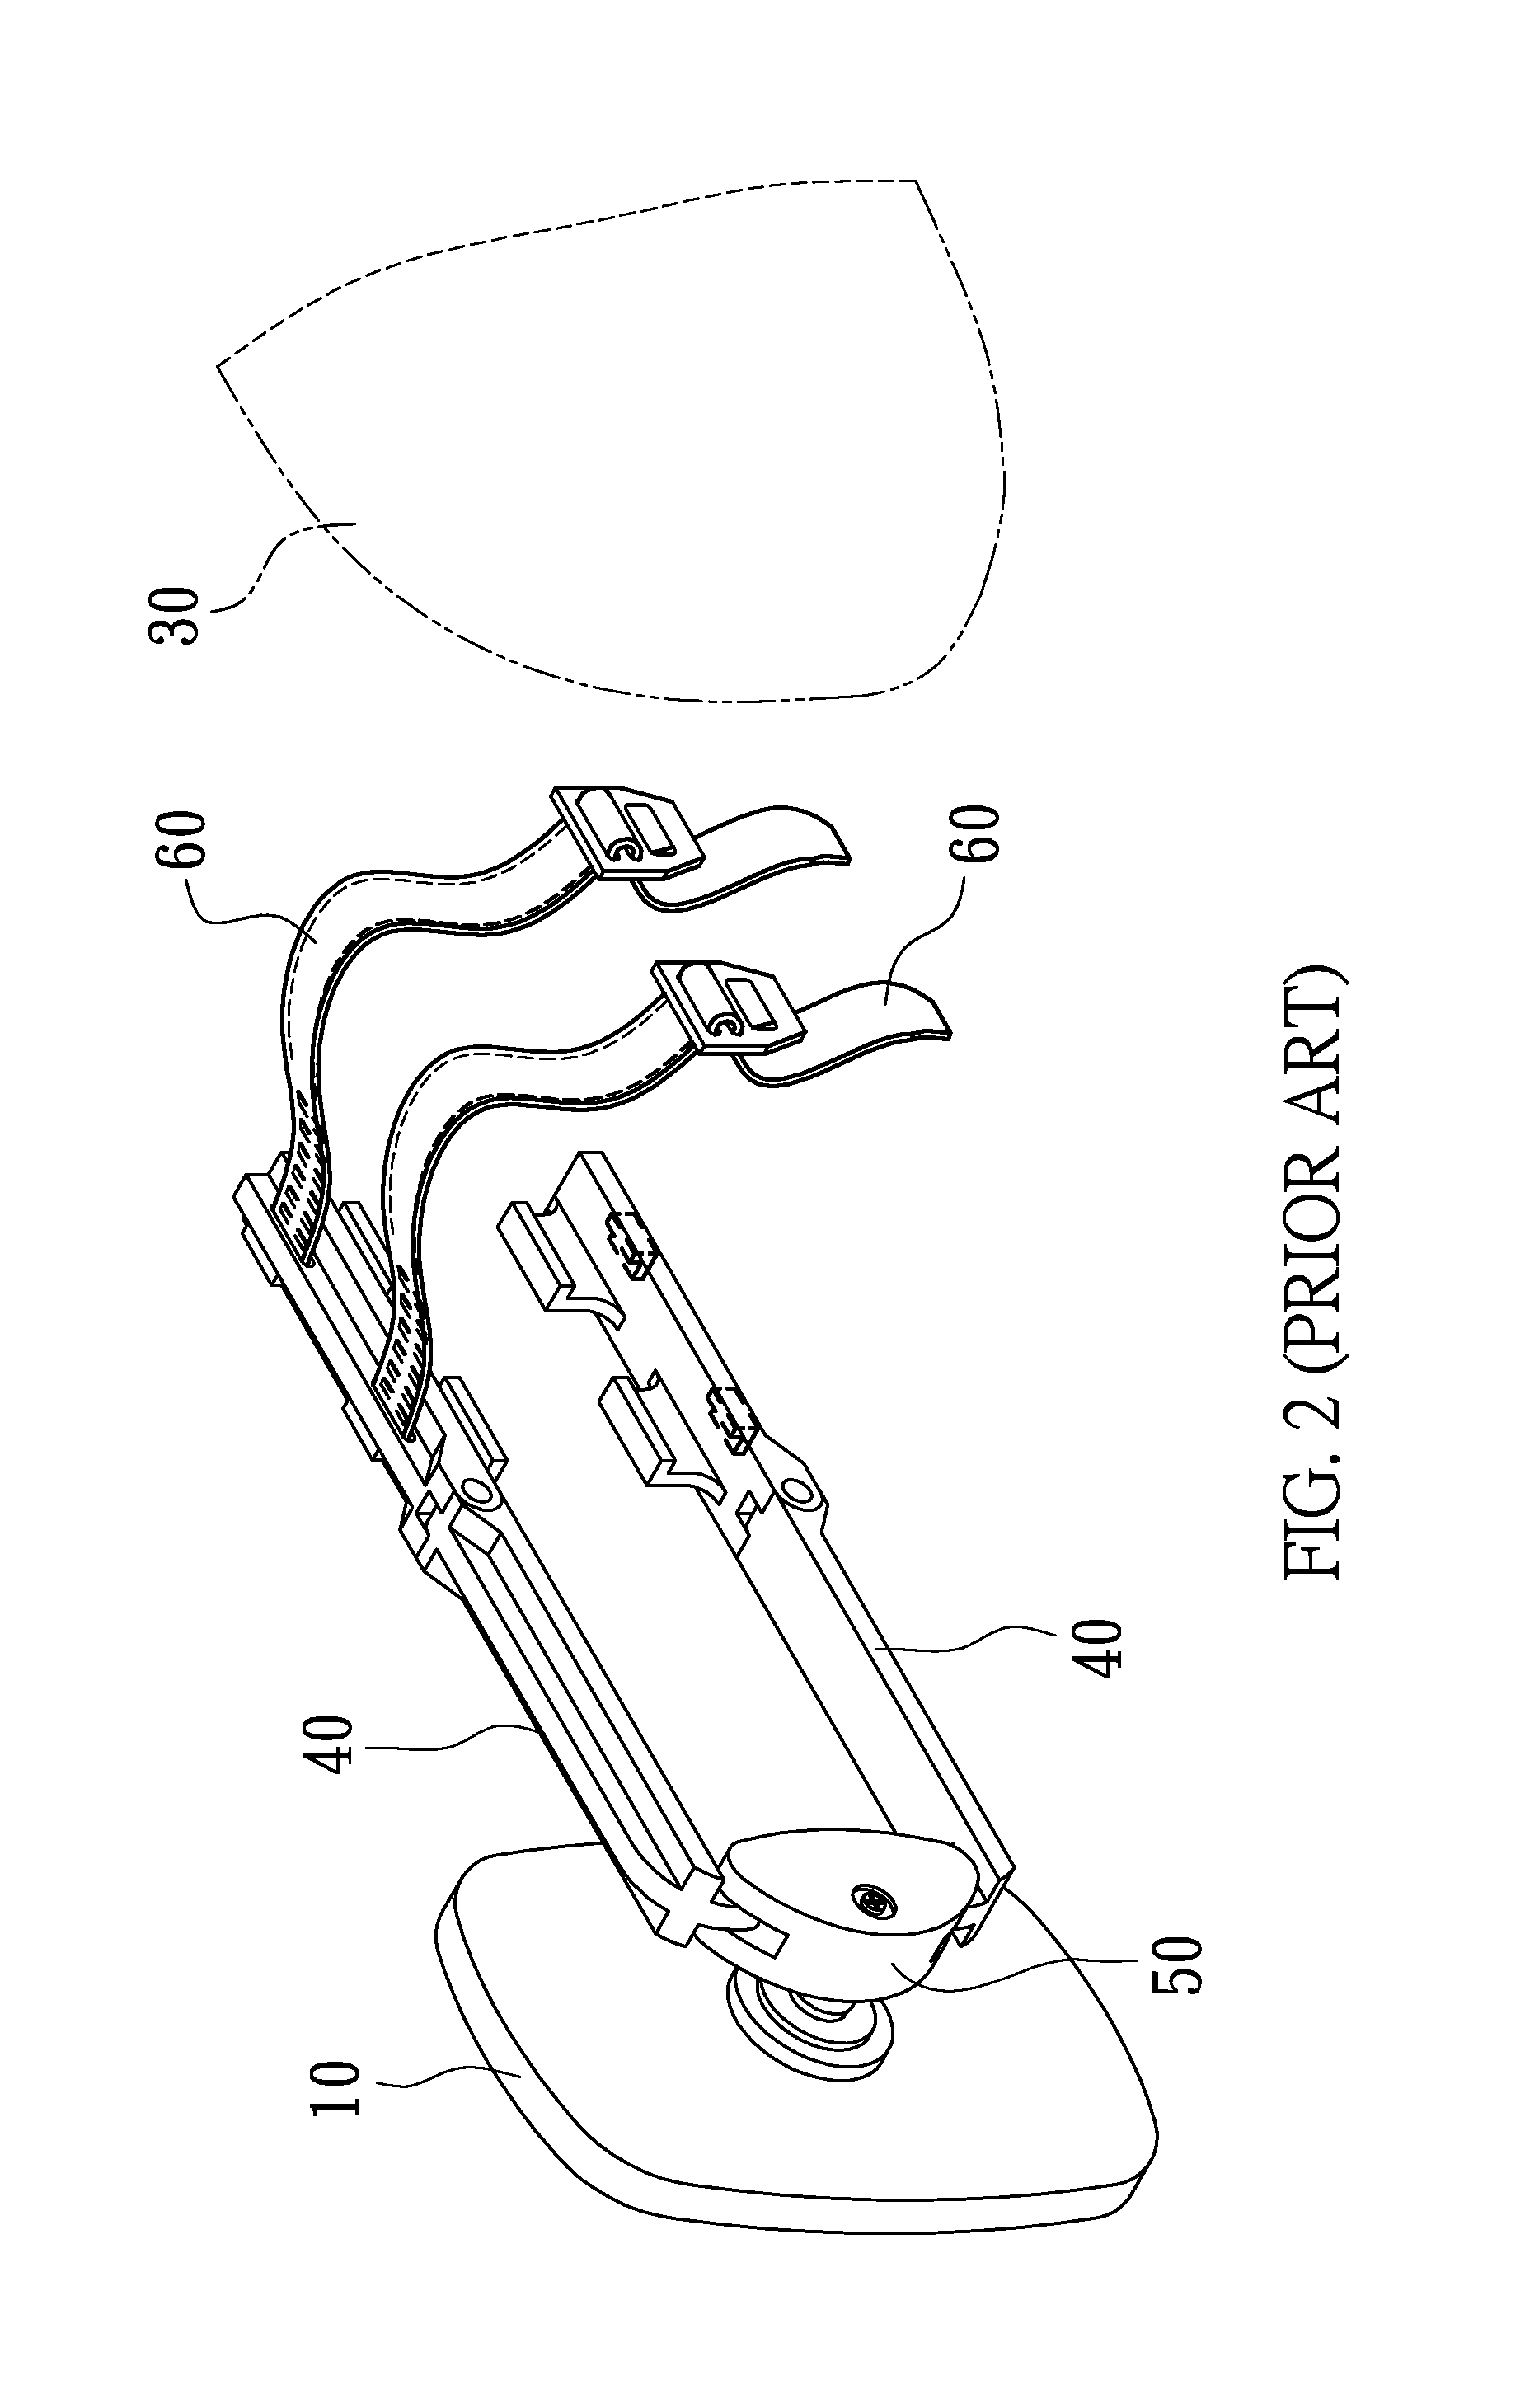 Auxiliary rearview mirror mounting structure